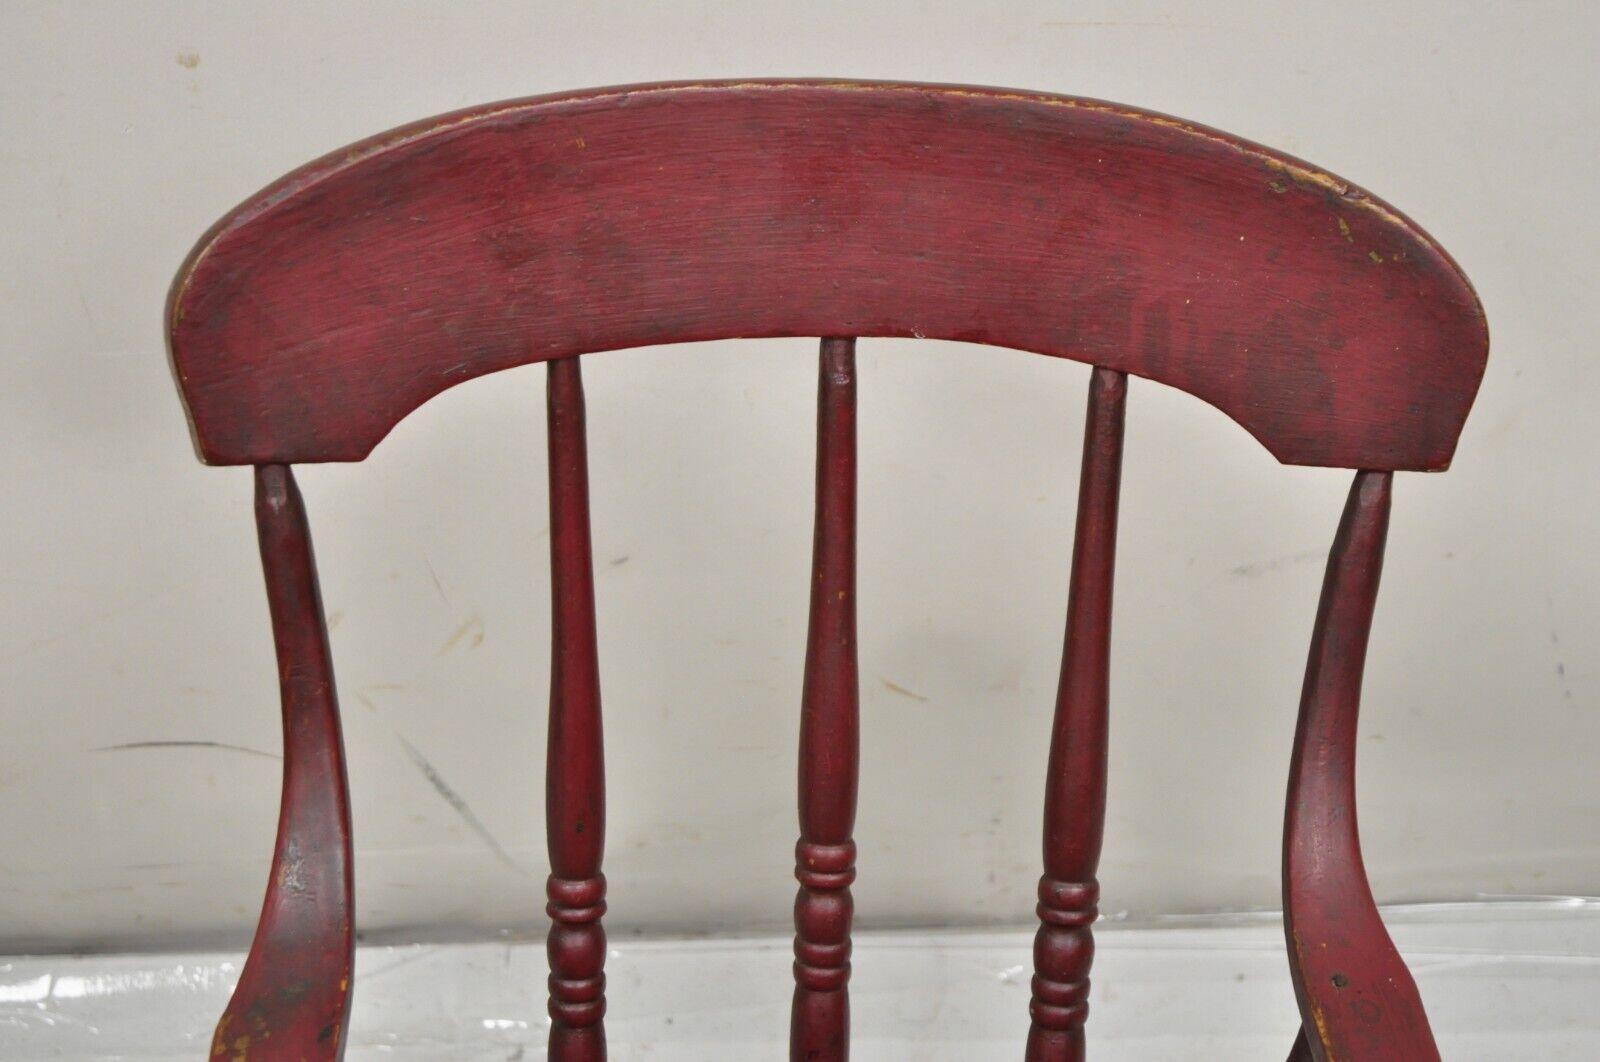 19th Century Antique American Primitive Spindle Back Small Child's Rocker Rocking Chair For Sale